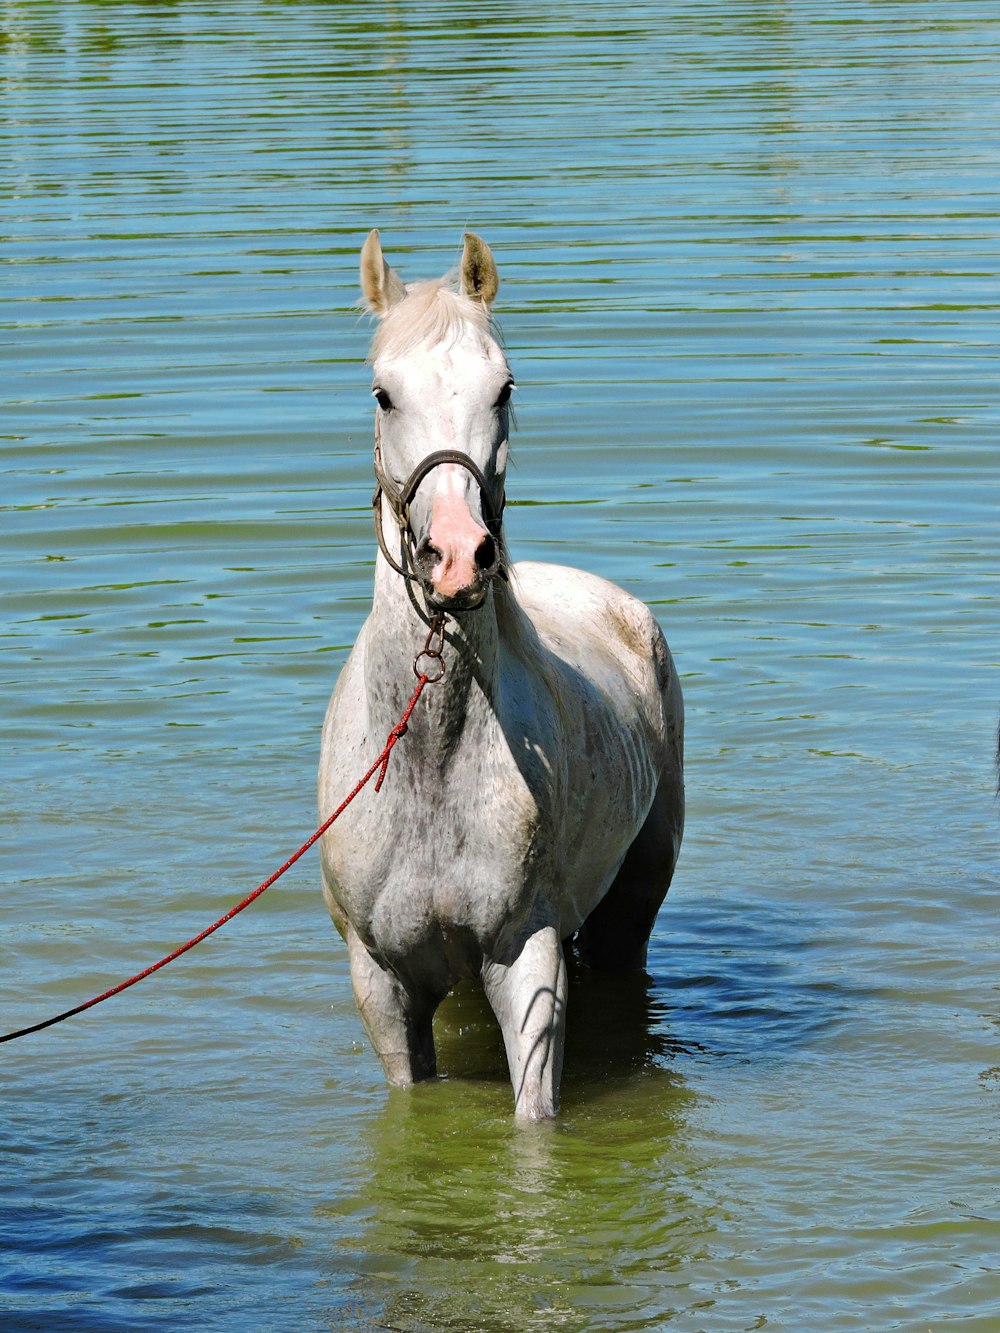 a white horse standing in a body of water